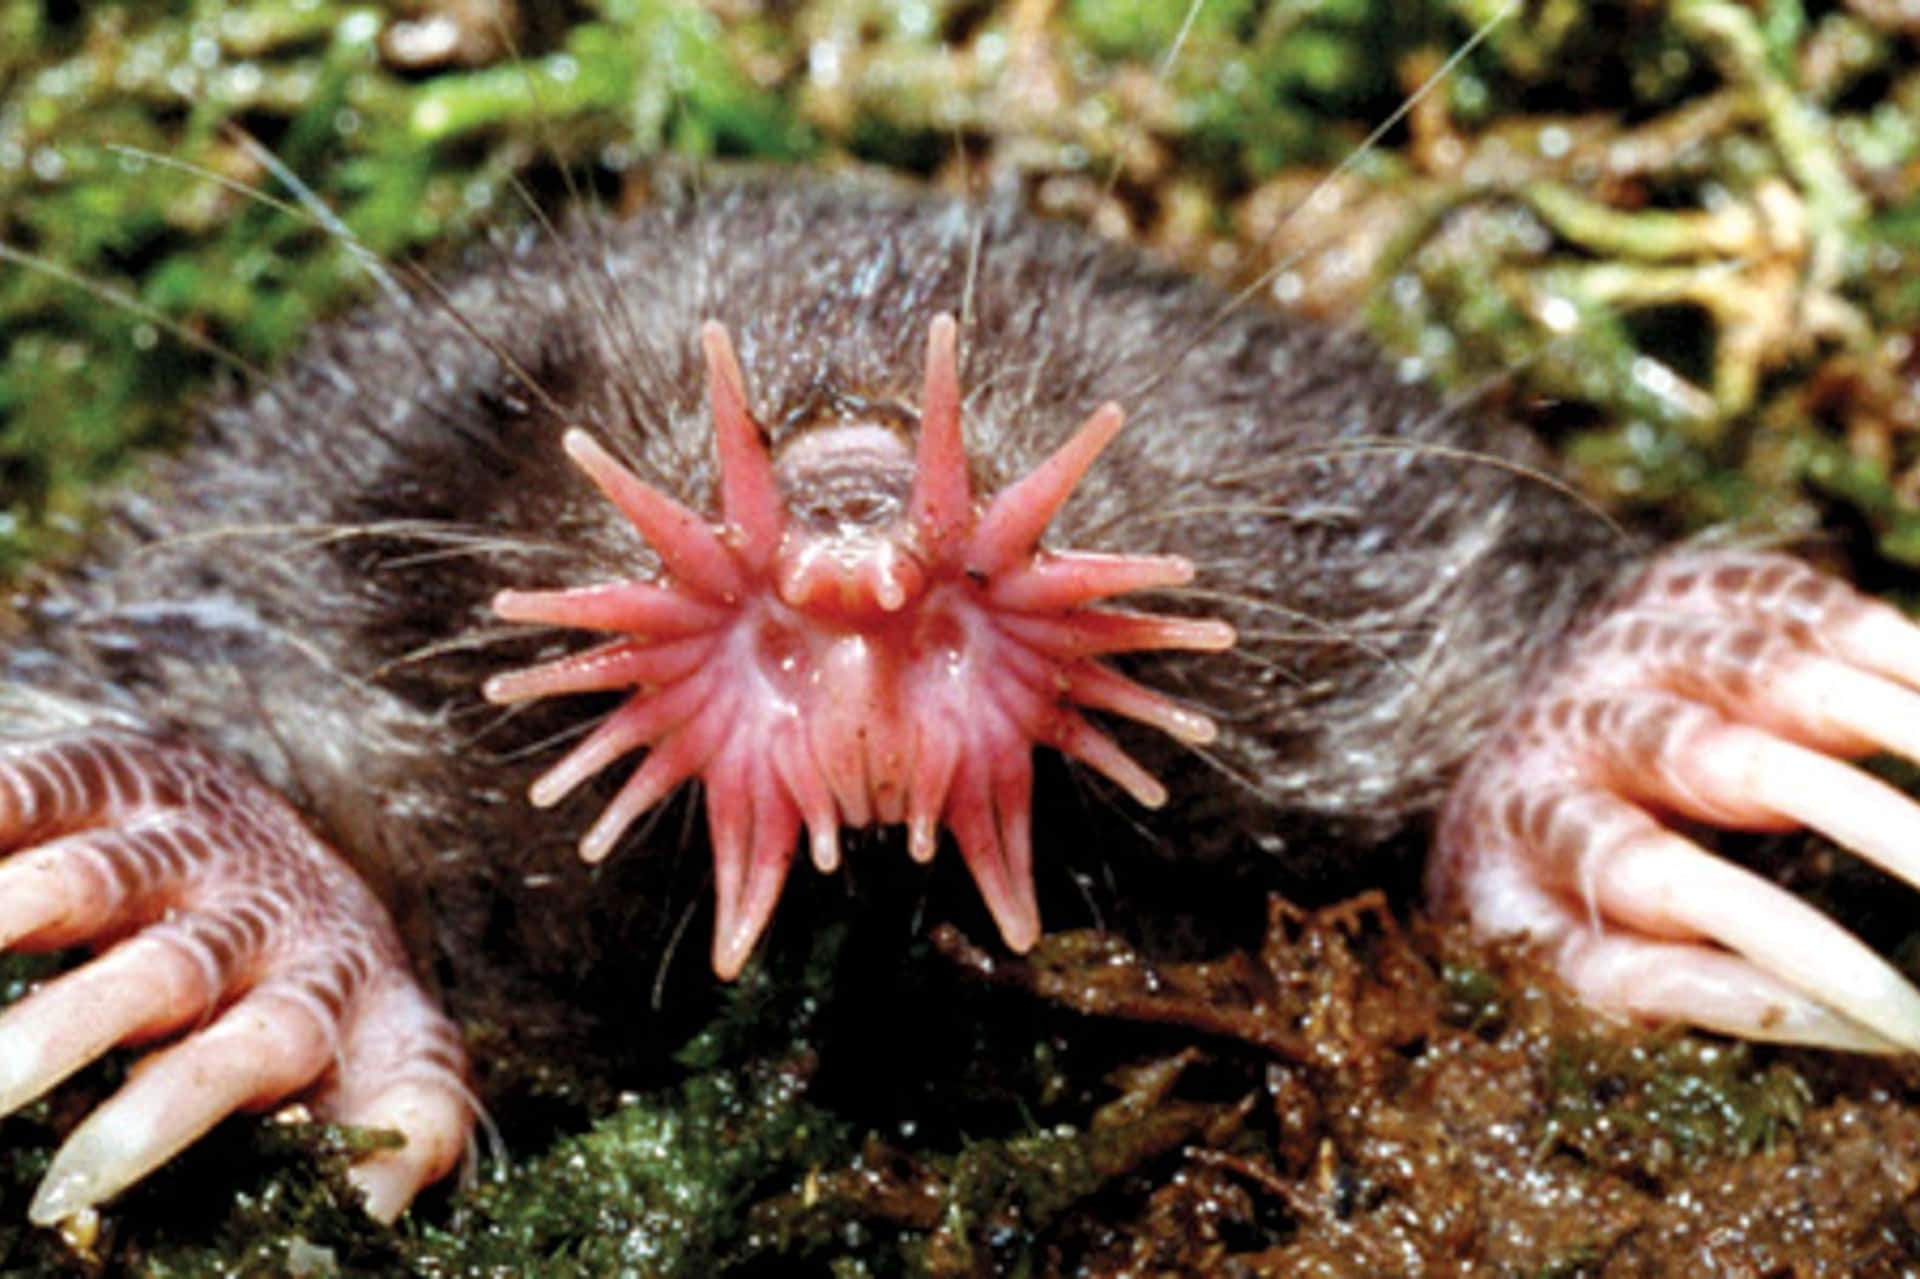 A Mole With Its Mouth Open